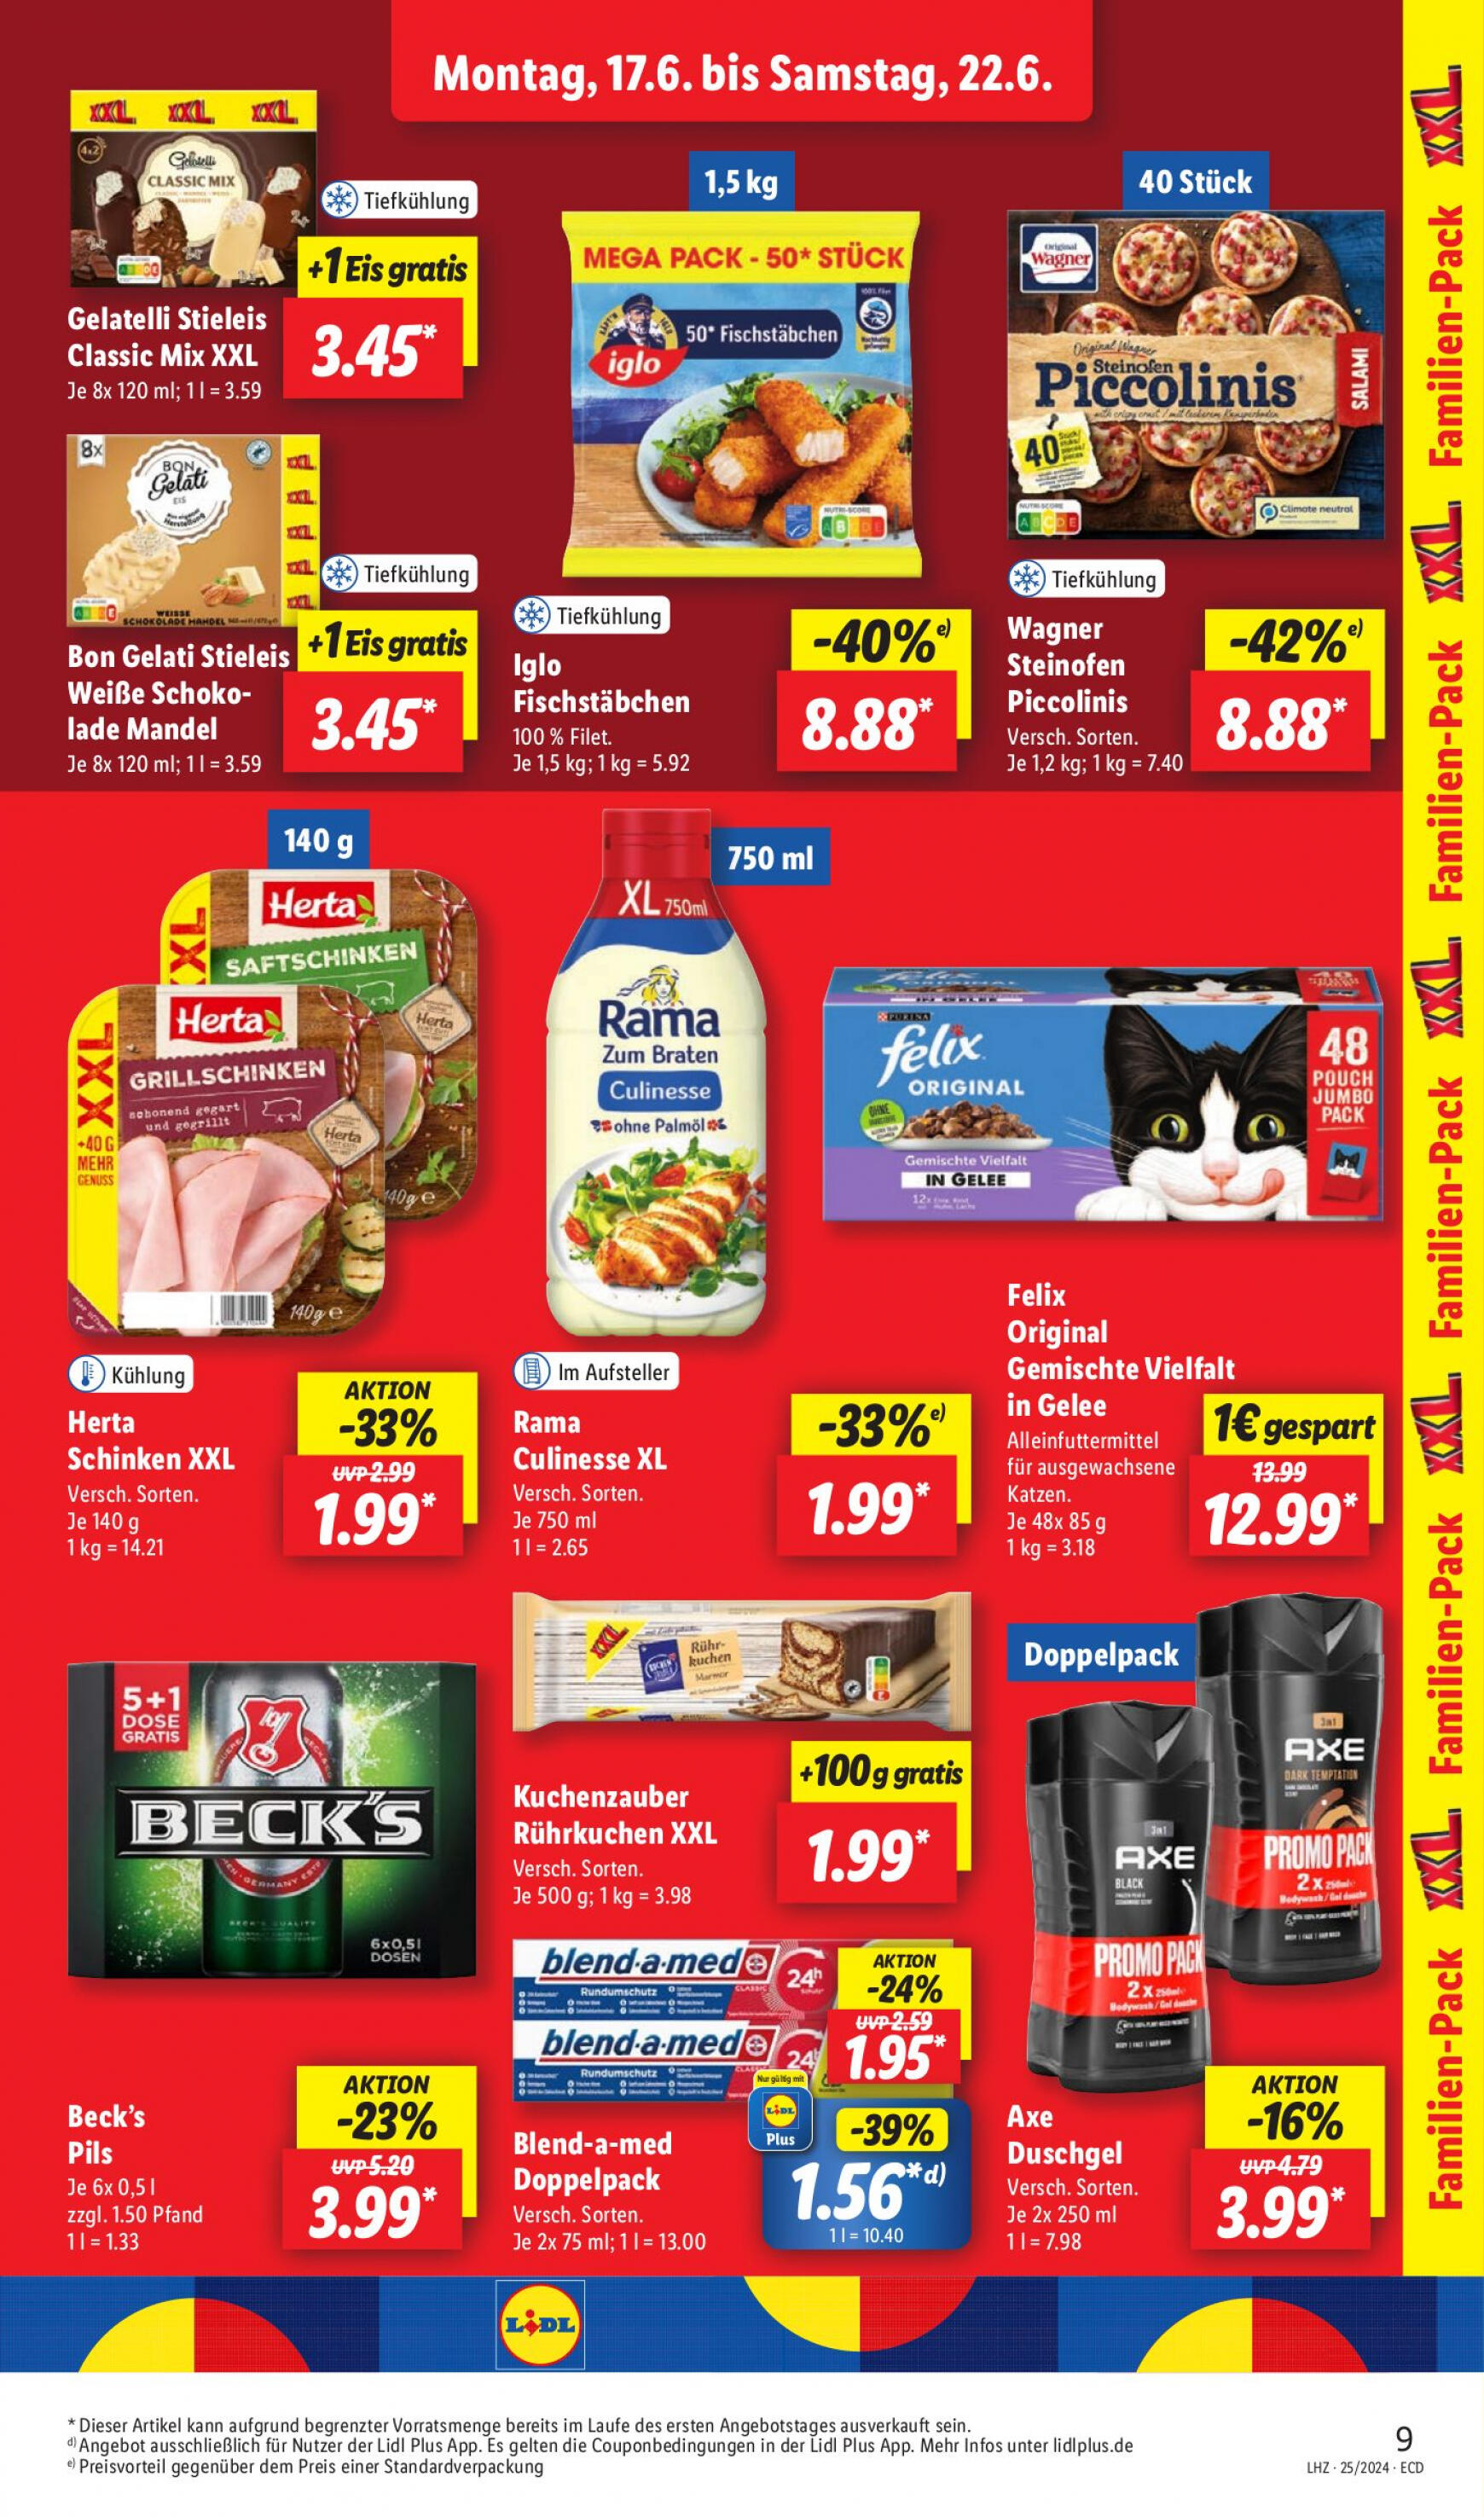 lidl - Flyer Lidl aktuell 17.06. - 22.06. - page: 13